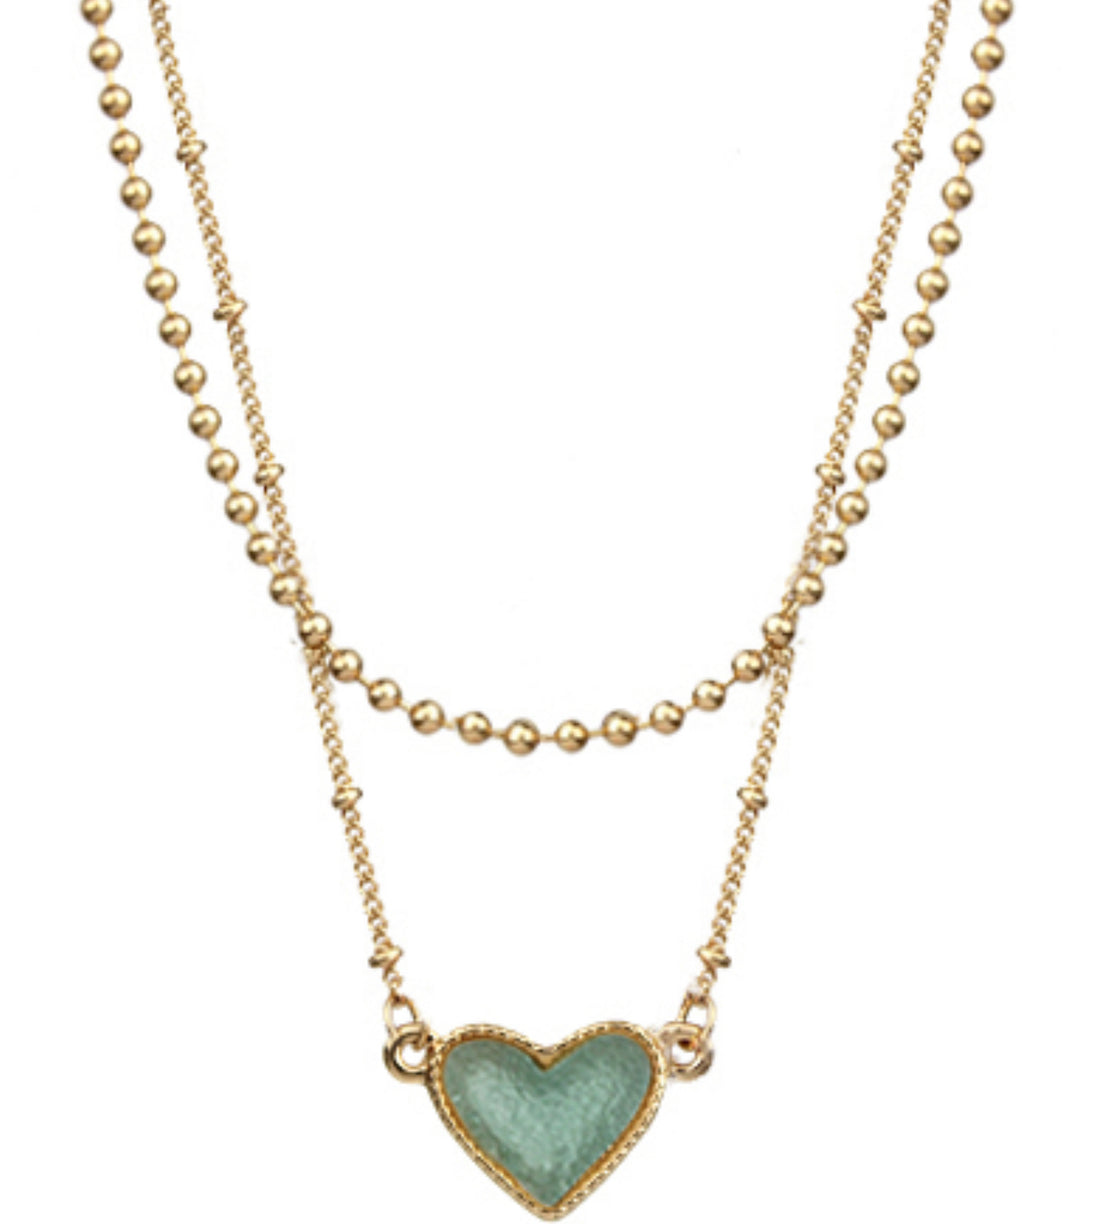 Small Druzy Heart Shaped Layered Pendant Necklace In Goldtone with Matching Earrings